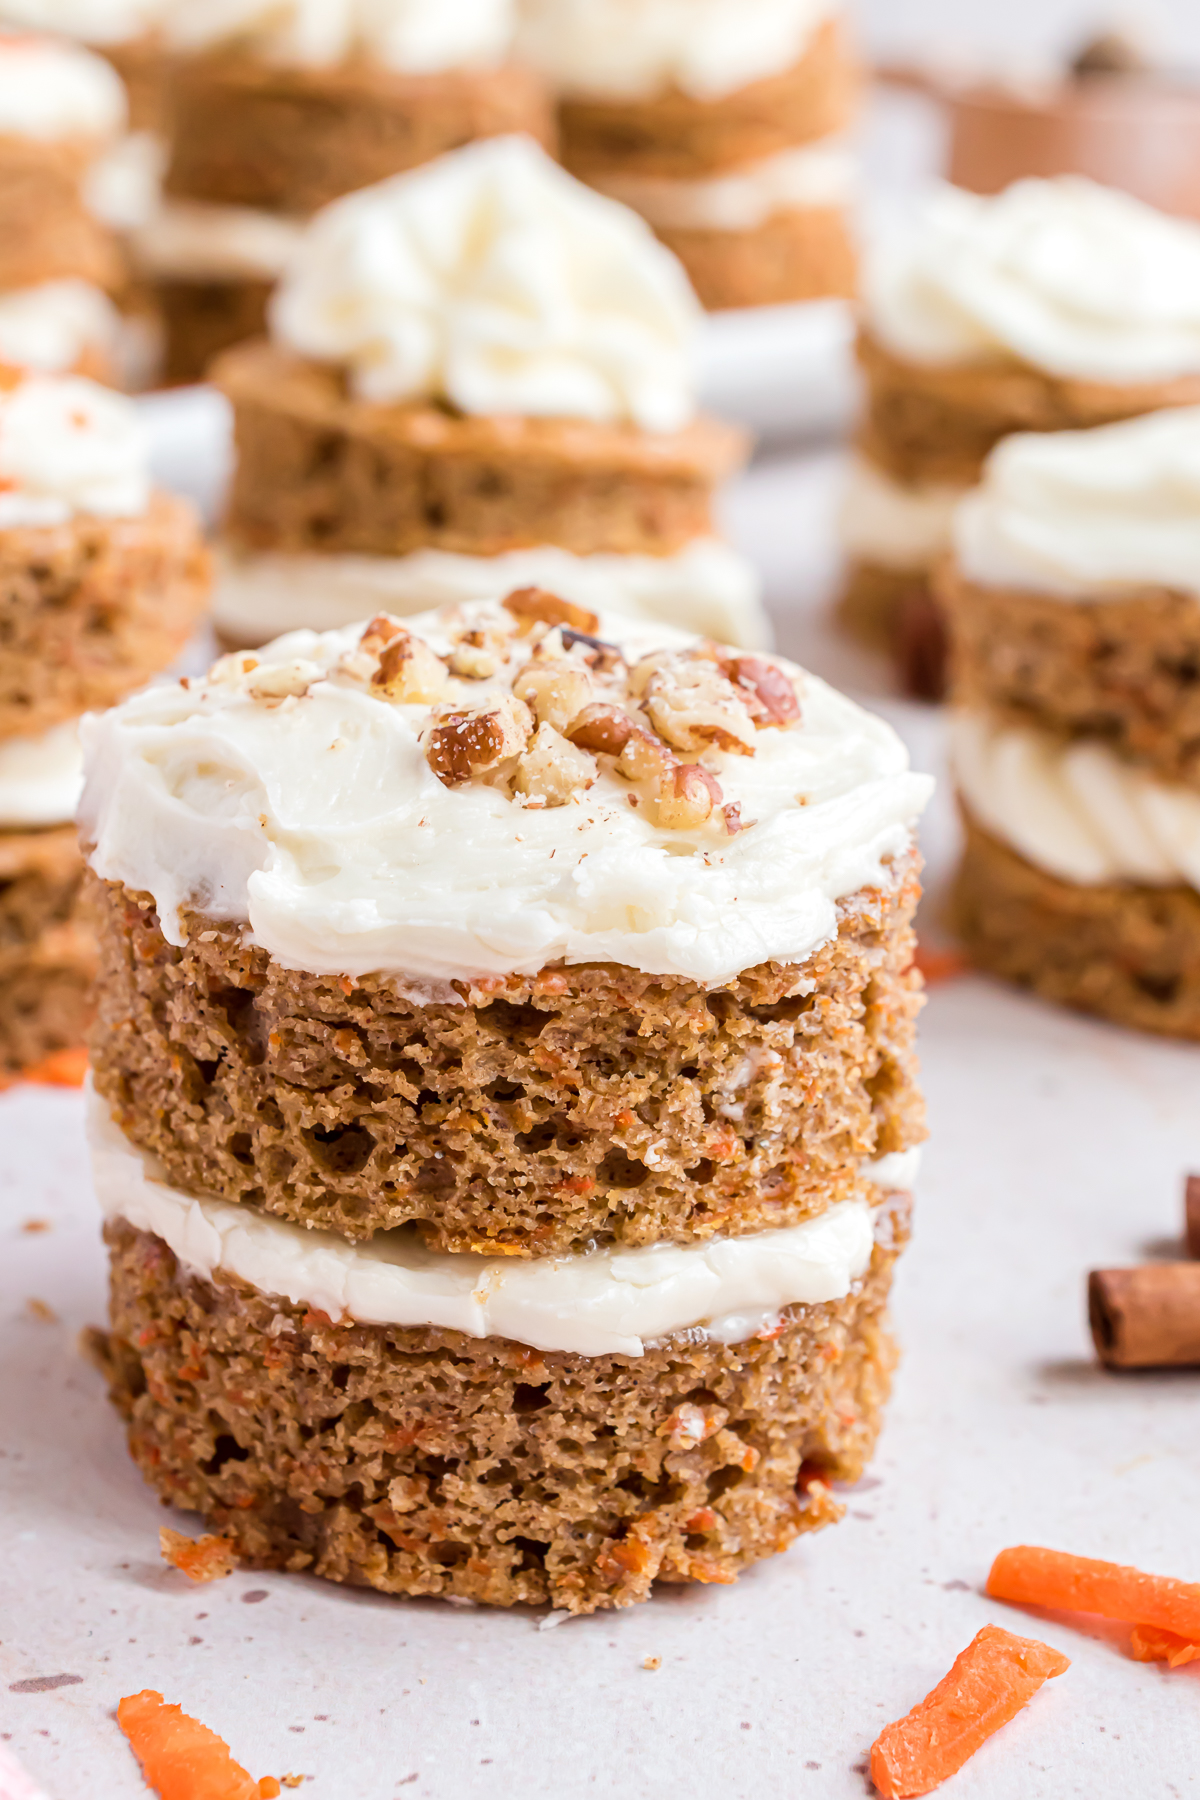 A double-layer mini carrot cake topped with chopped pecans